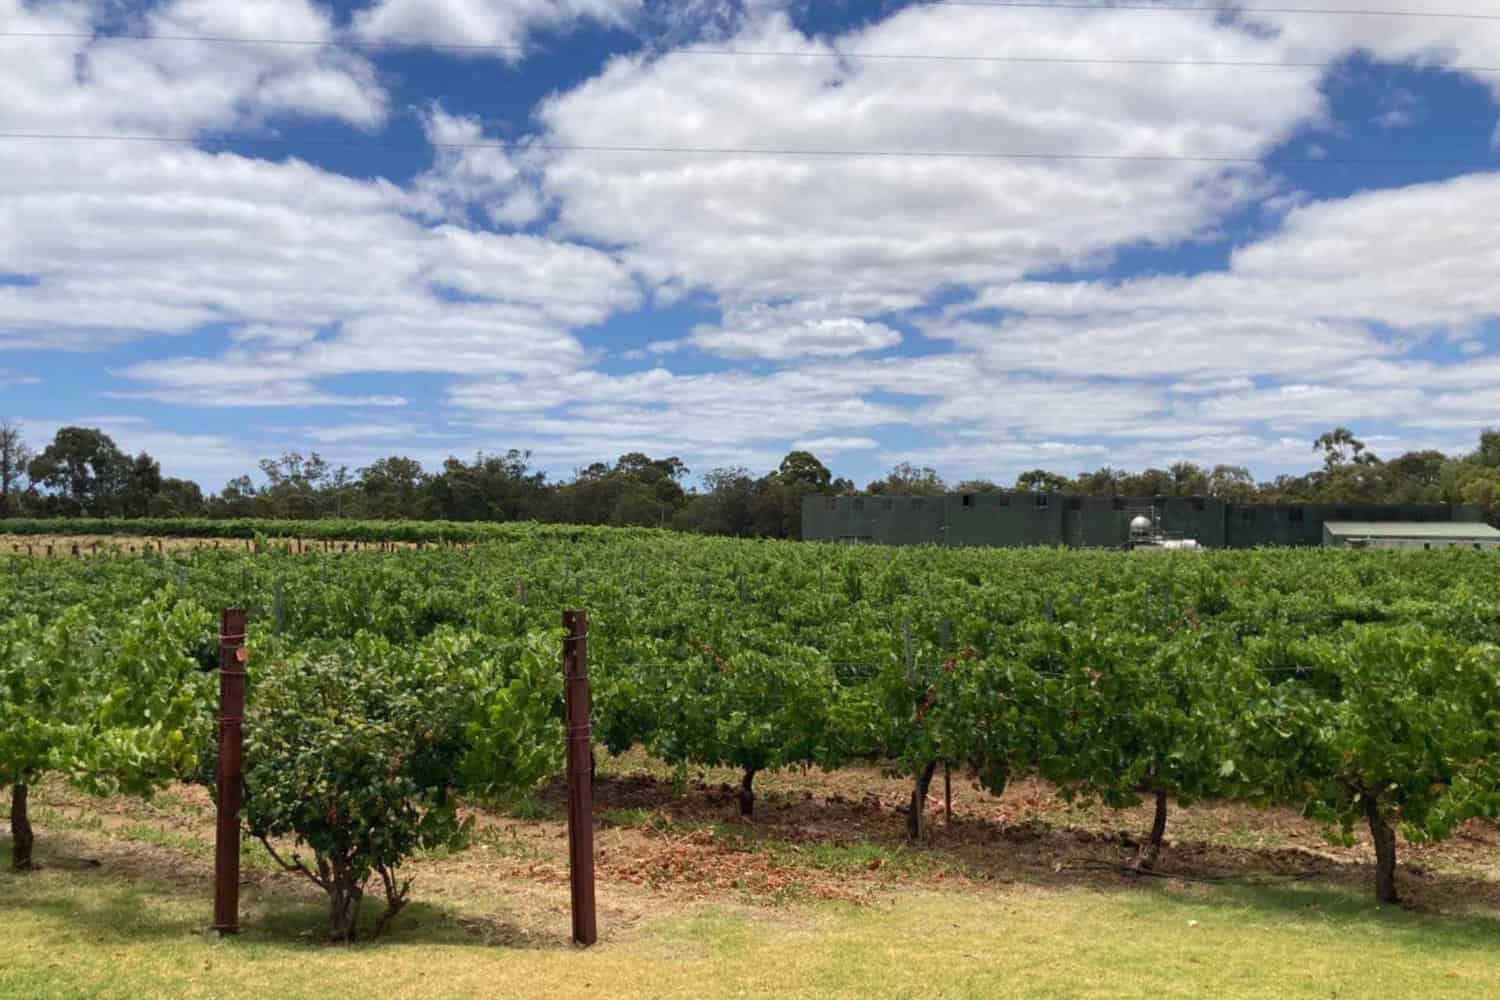 Lush vineyards under a cloudy sky in Margaret River, a region renowned for its premium winemaking.